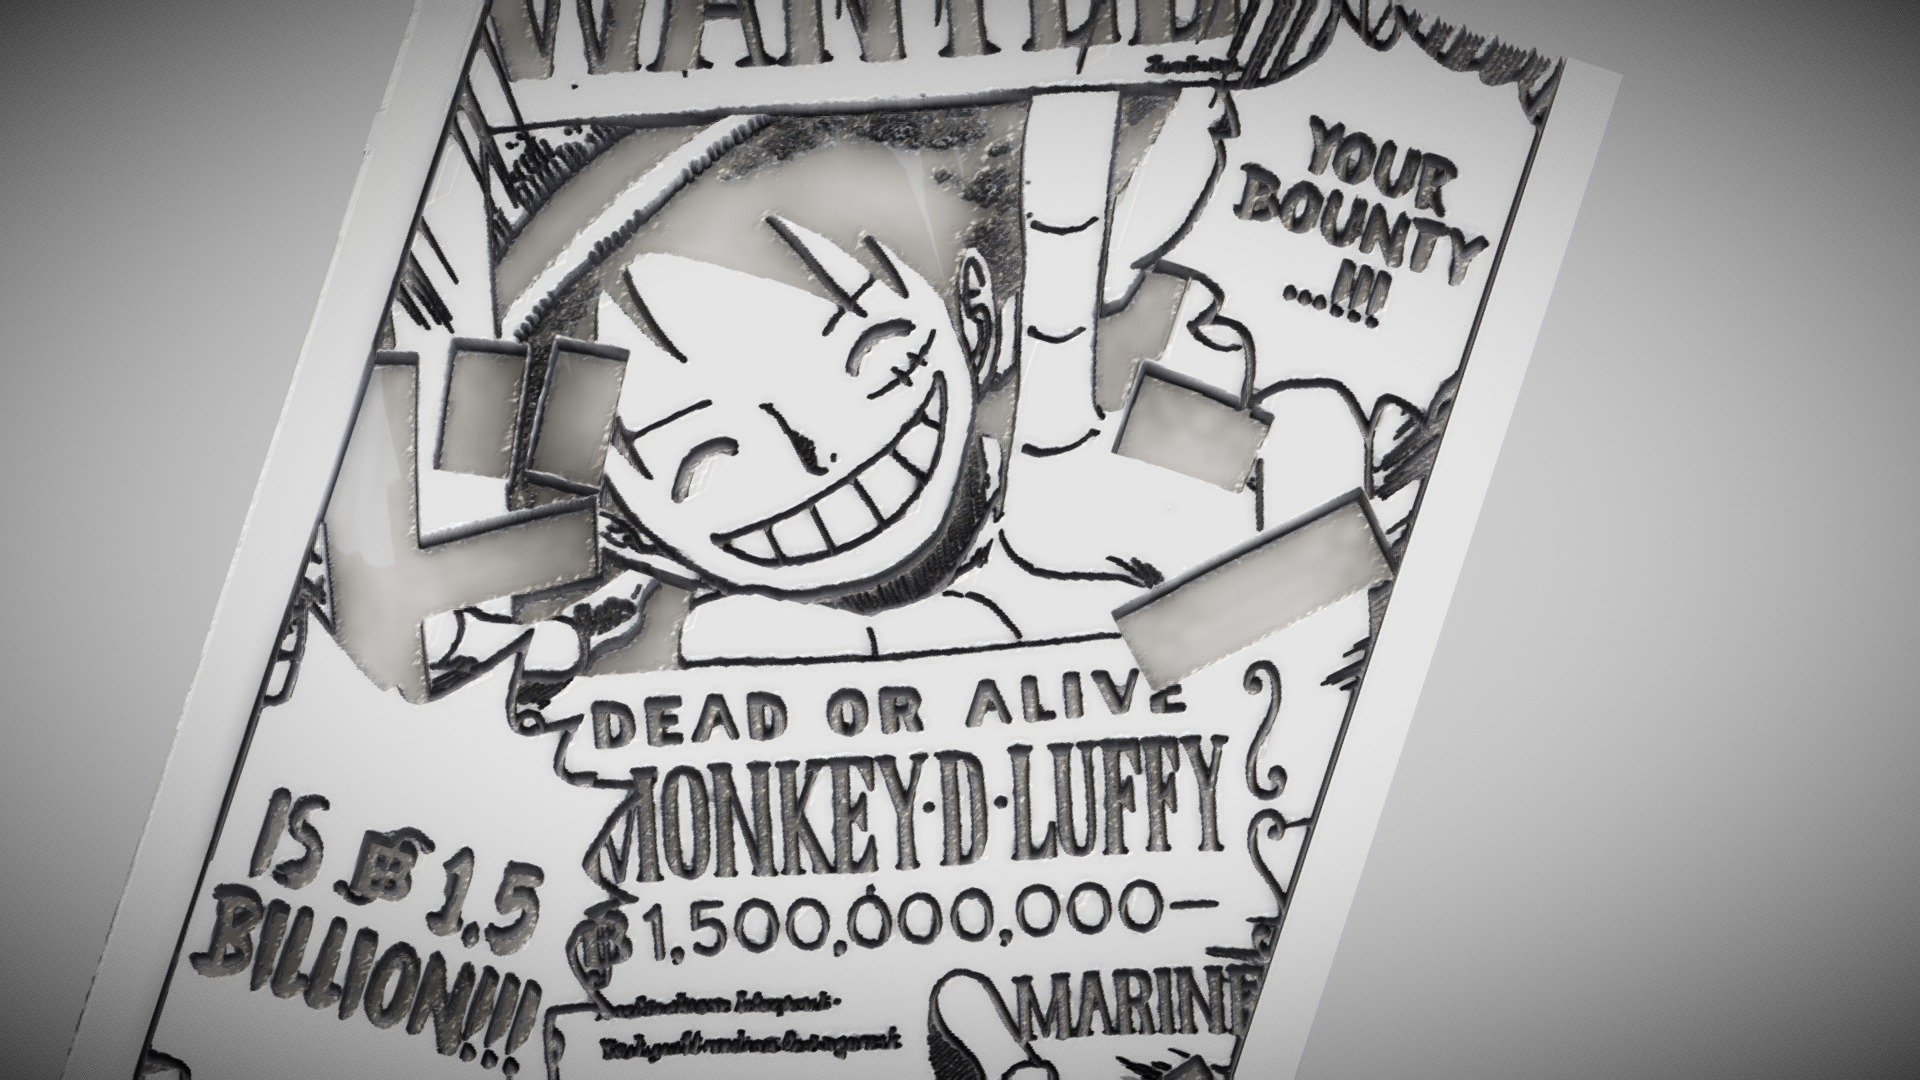 One Piece - Luffy wanted poster 3D model 3D printable